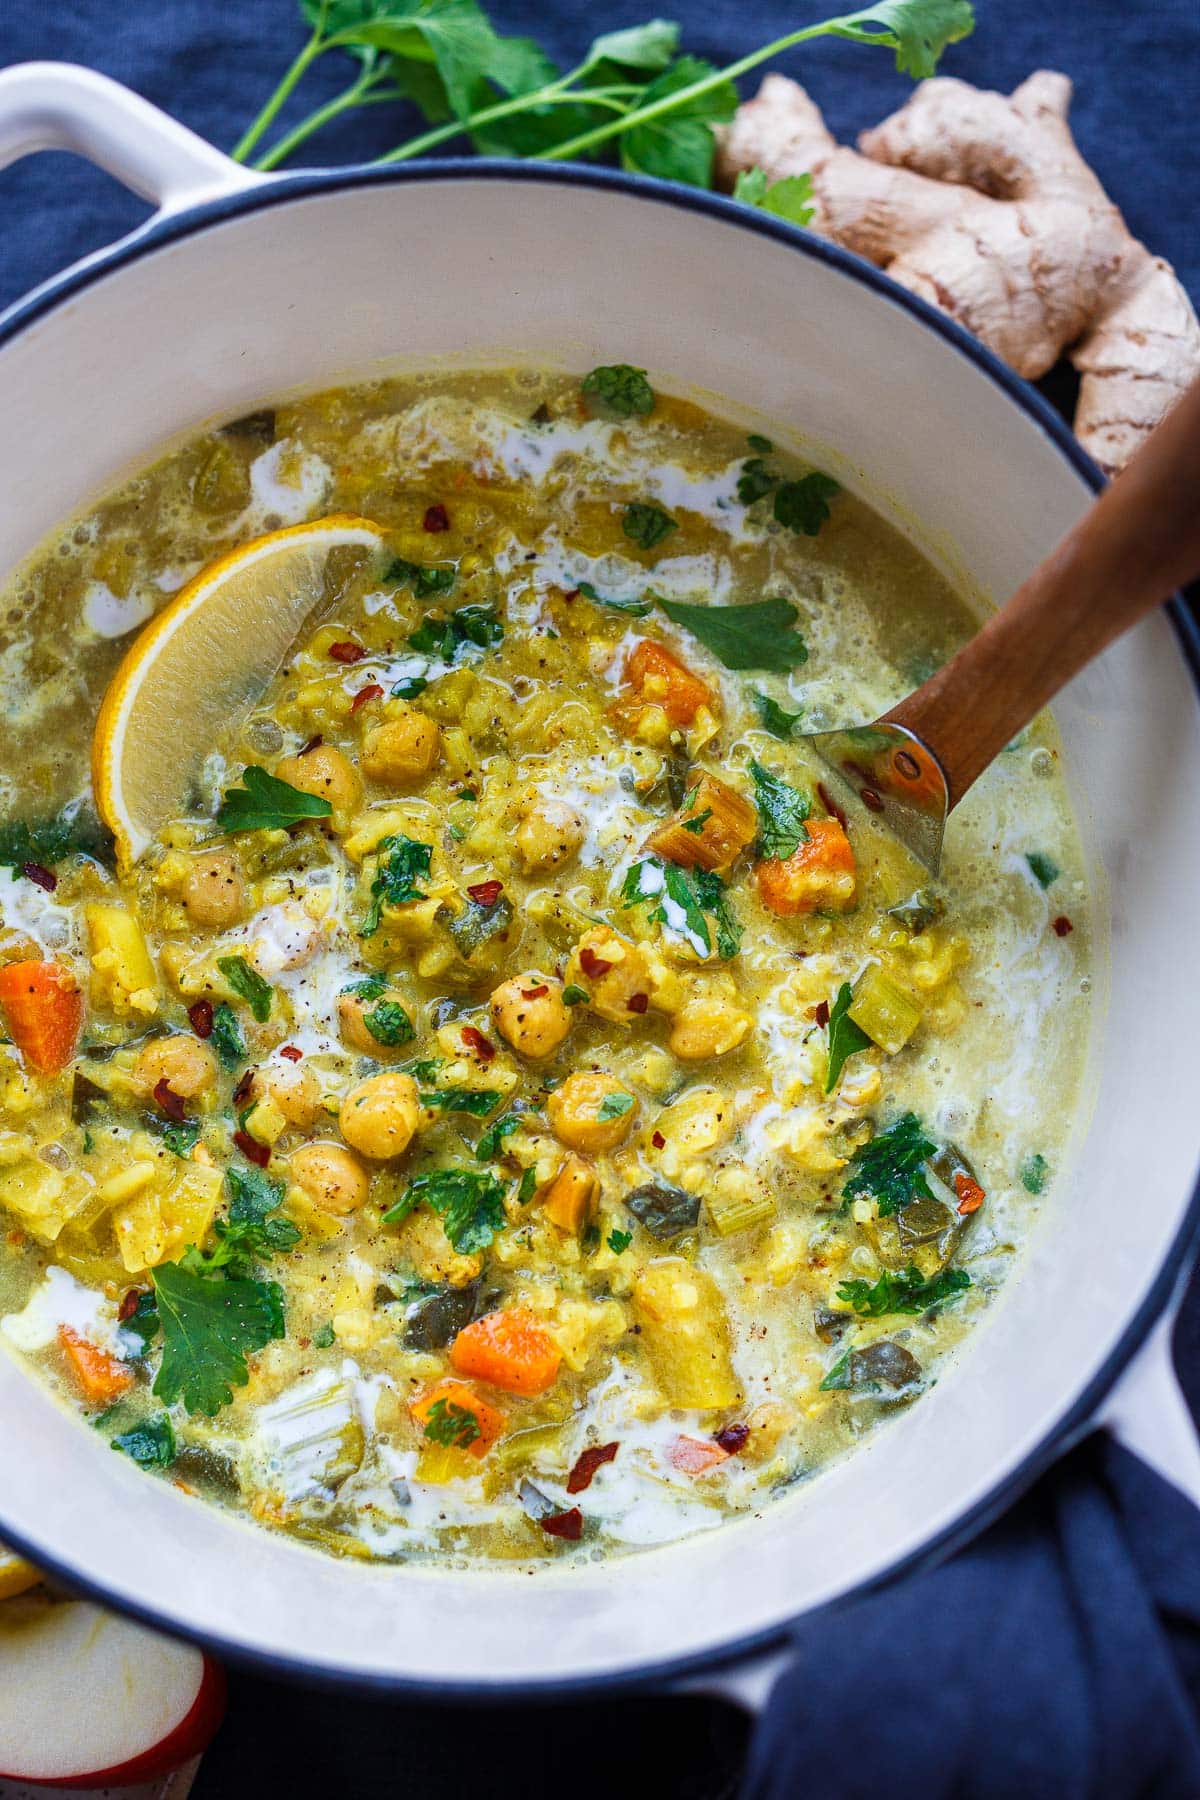 This vegan Chickpea Soup recipe is bursting with flavor! Made with veggies and rice in a golden turmeric coconut milk broth. A cheery soup for cozy winter days. Gluten-free.